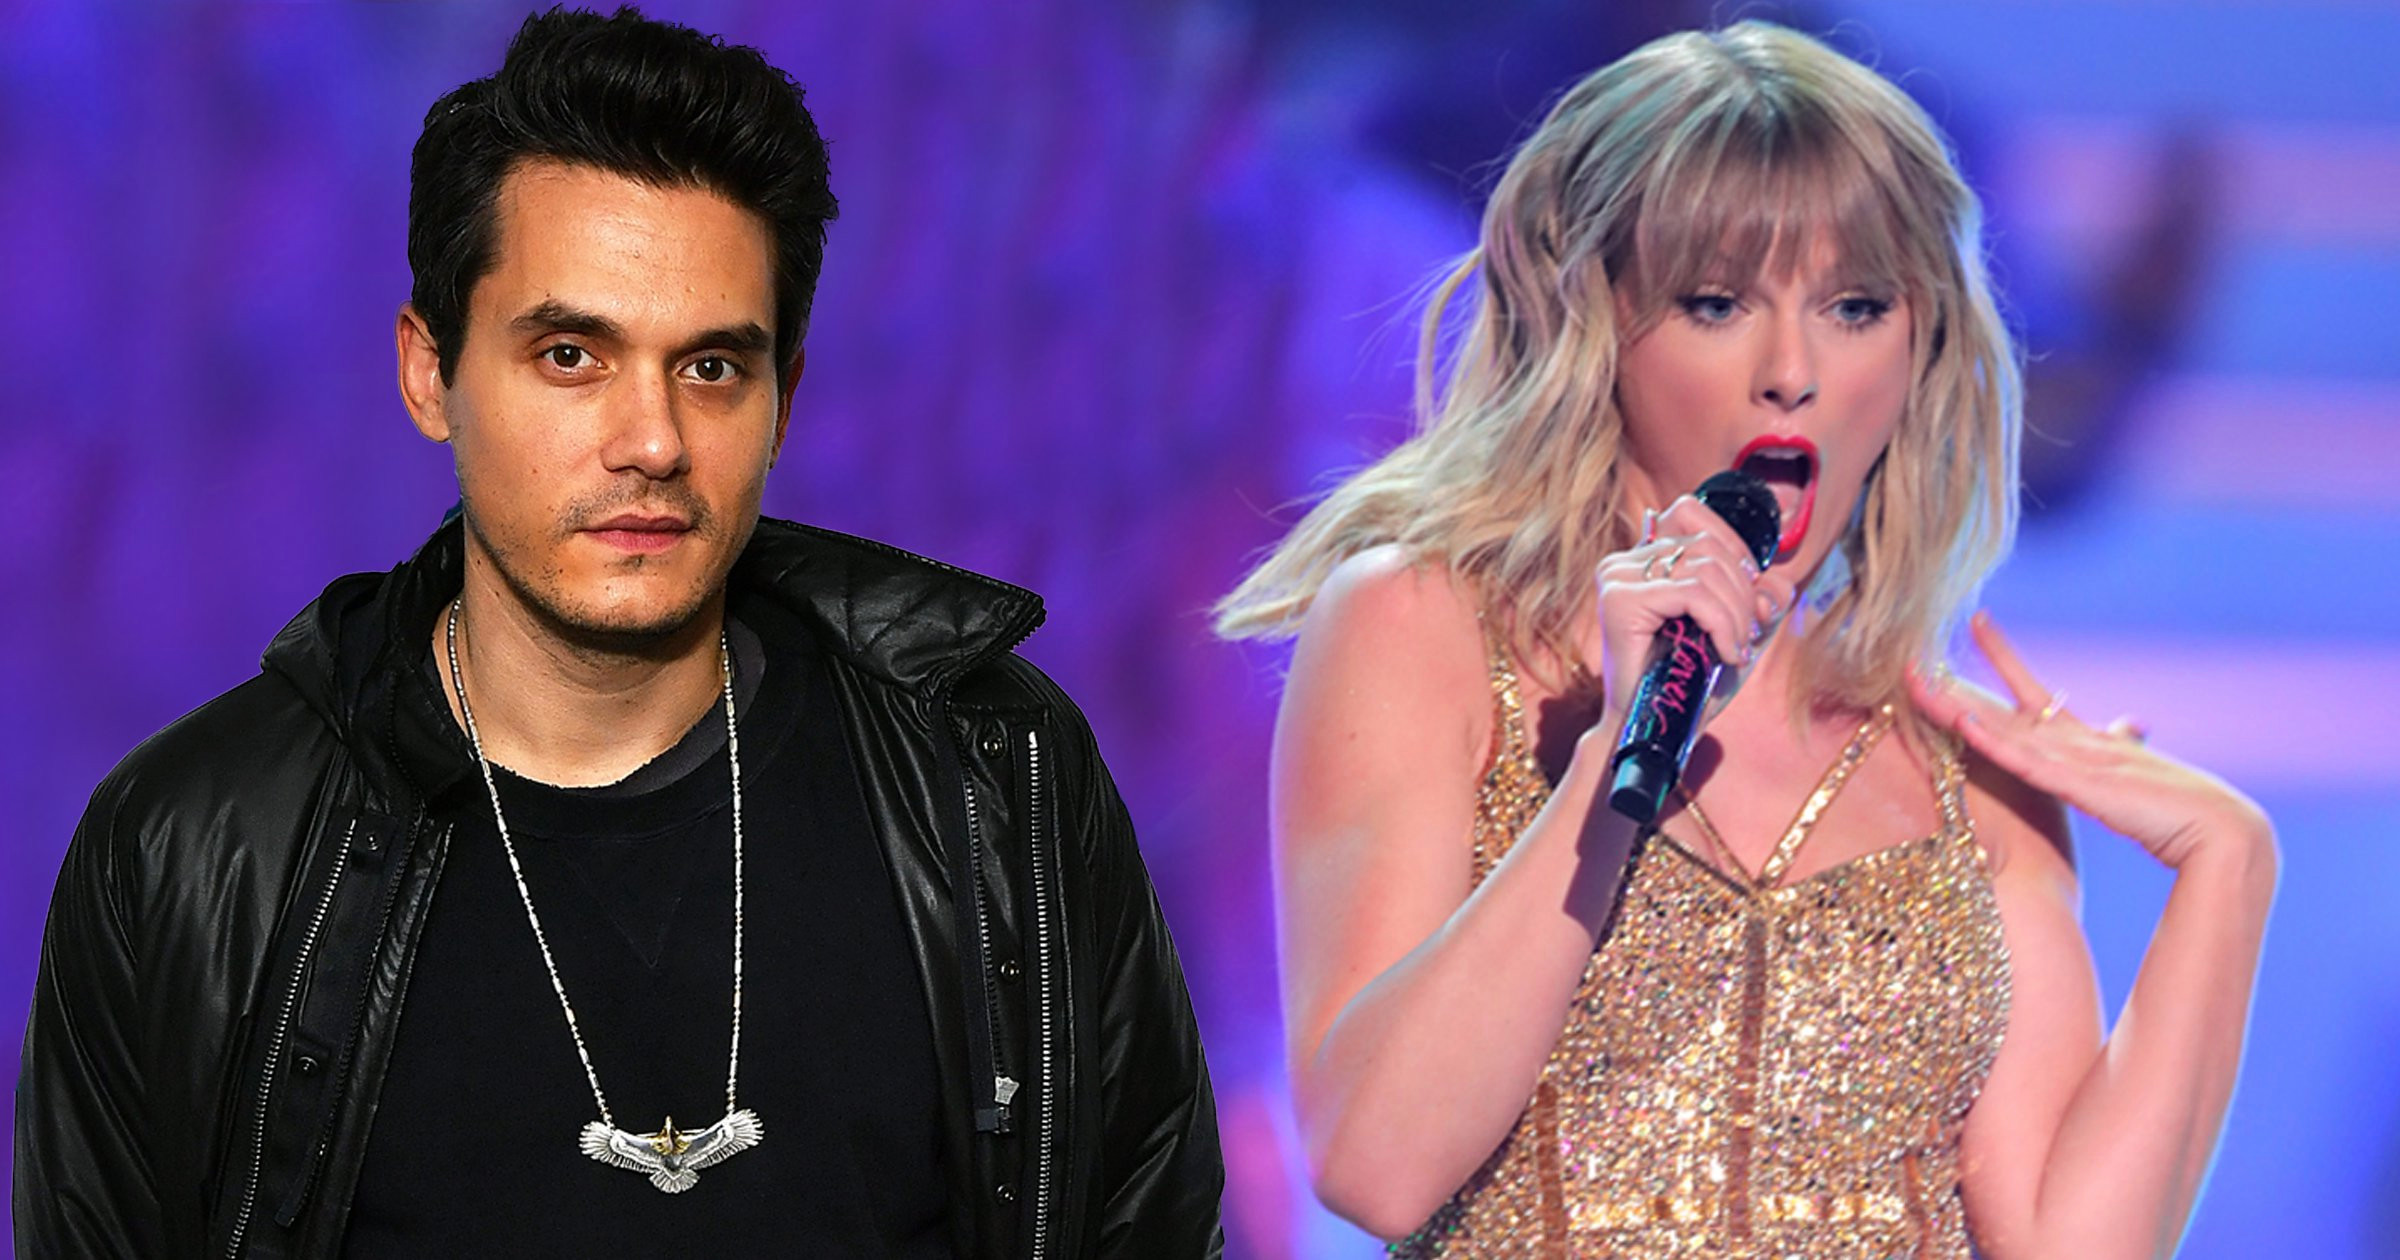 John Mayer gets roasted by Taylor Swift fans after joining TikTok: ‘We will never forget what you did’